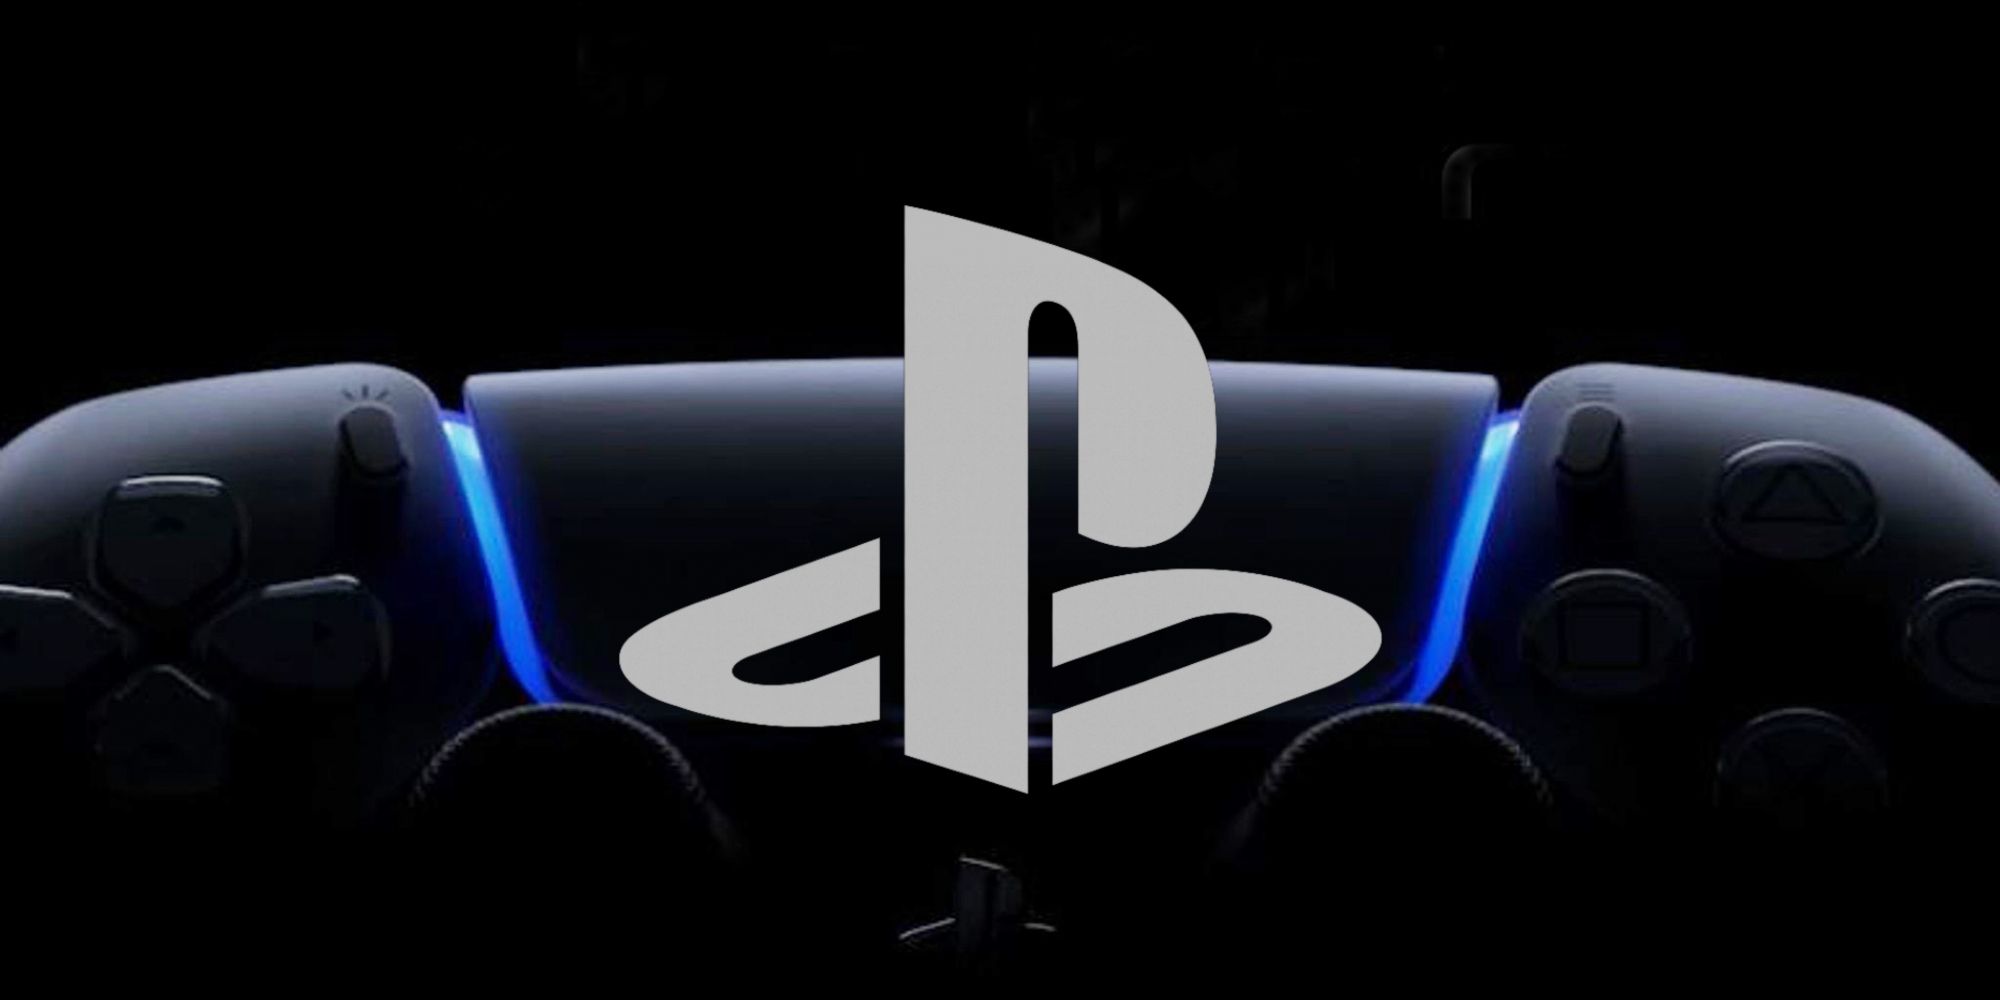 Where And When To Watch Sony's PlayStation Showcase, And What To